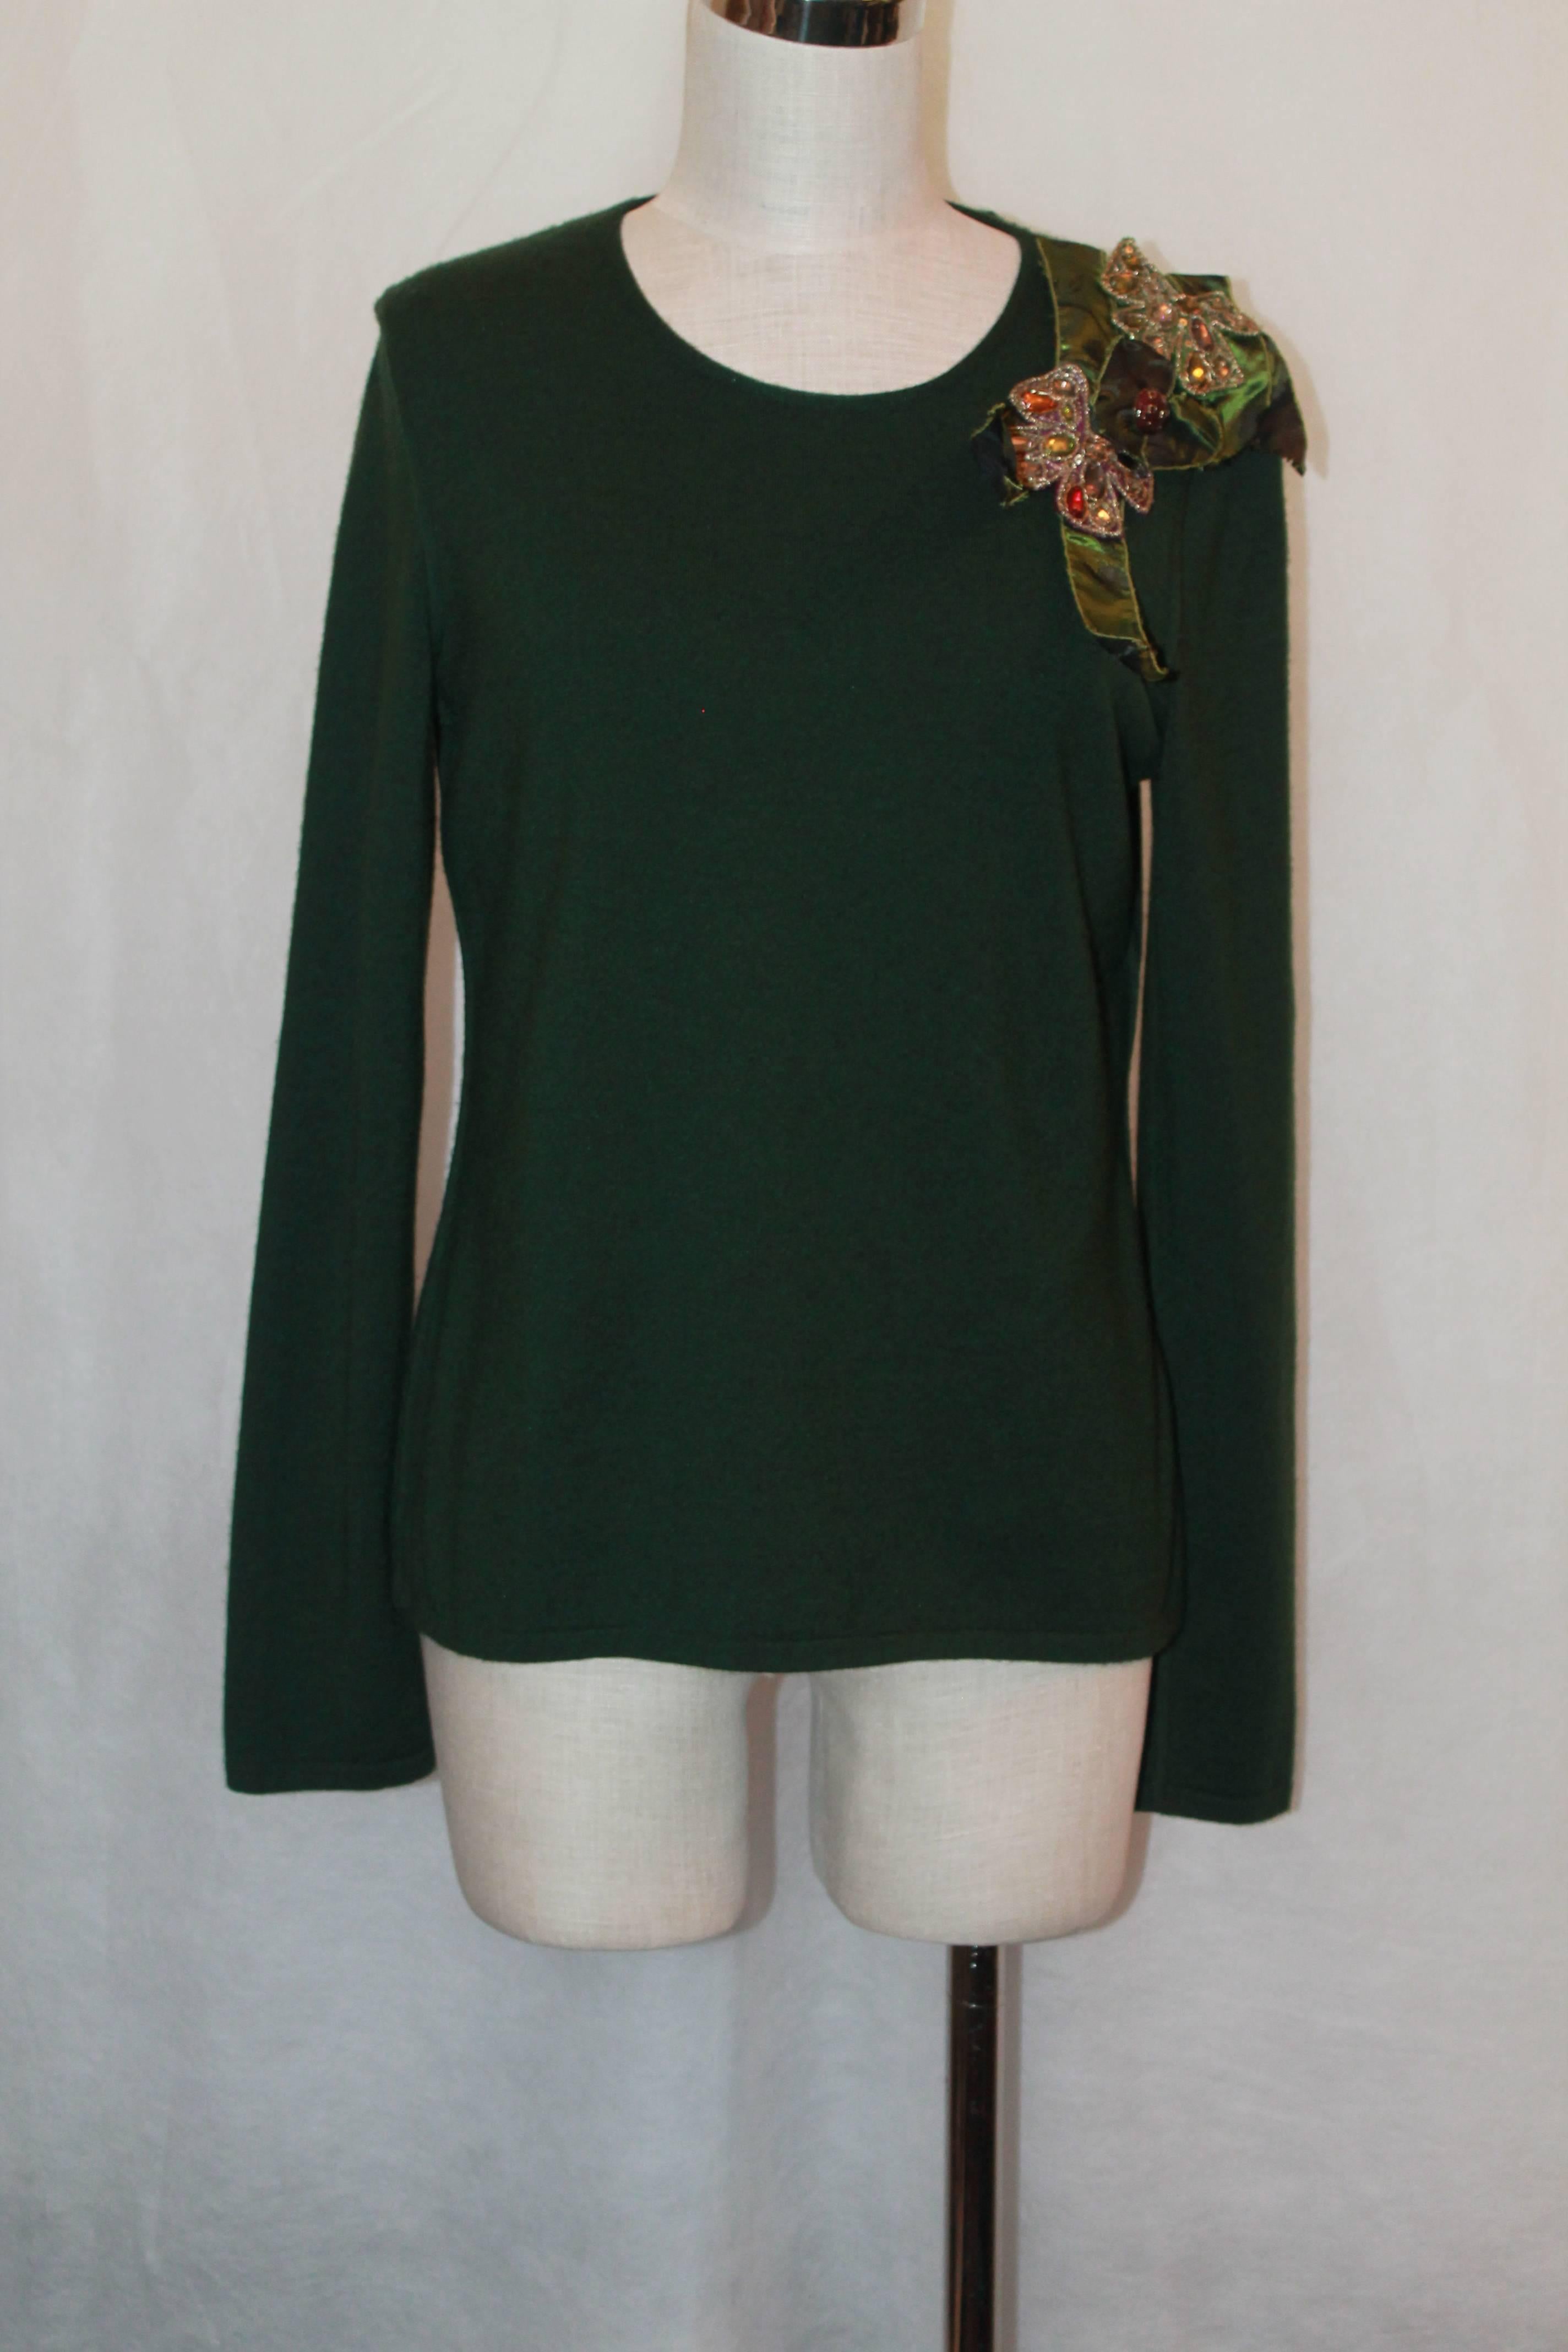 Oscar de la Renta Emerald Cashmere/Silk Blend Round Neck Sweater - Large.  This sweater is long-sleeved and has a jeweled and stitched cluster on the left shoulder.  It has an enamel gold and emerald button on the back.  It is in excellent